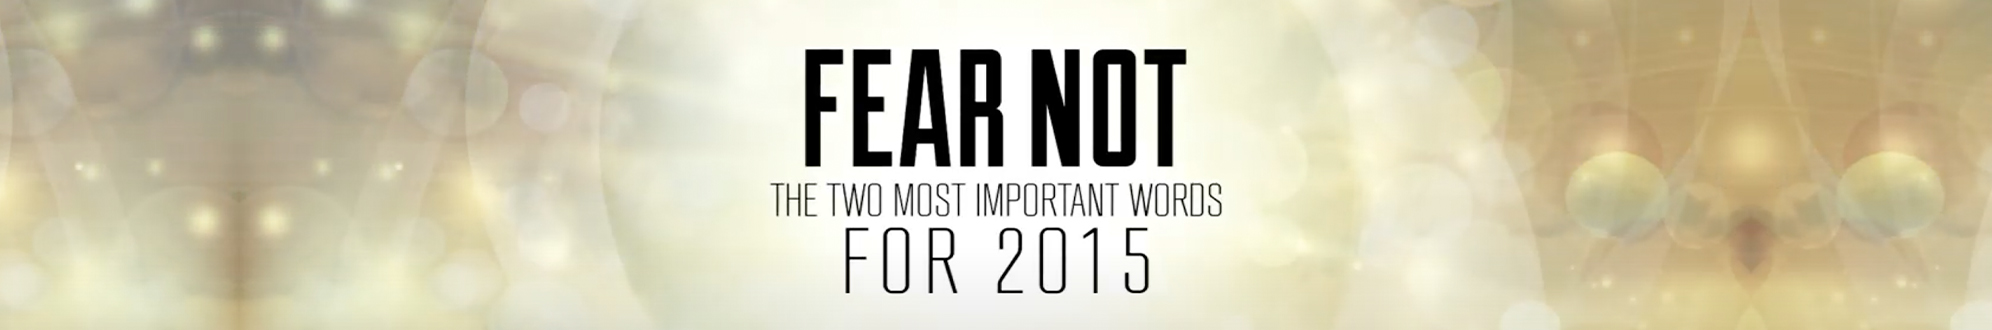 The Two Most Important Words for 2015